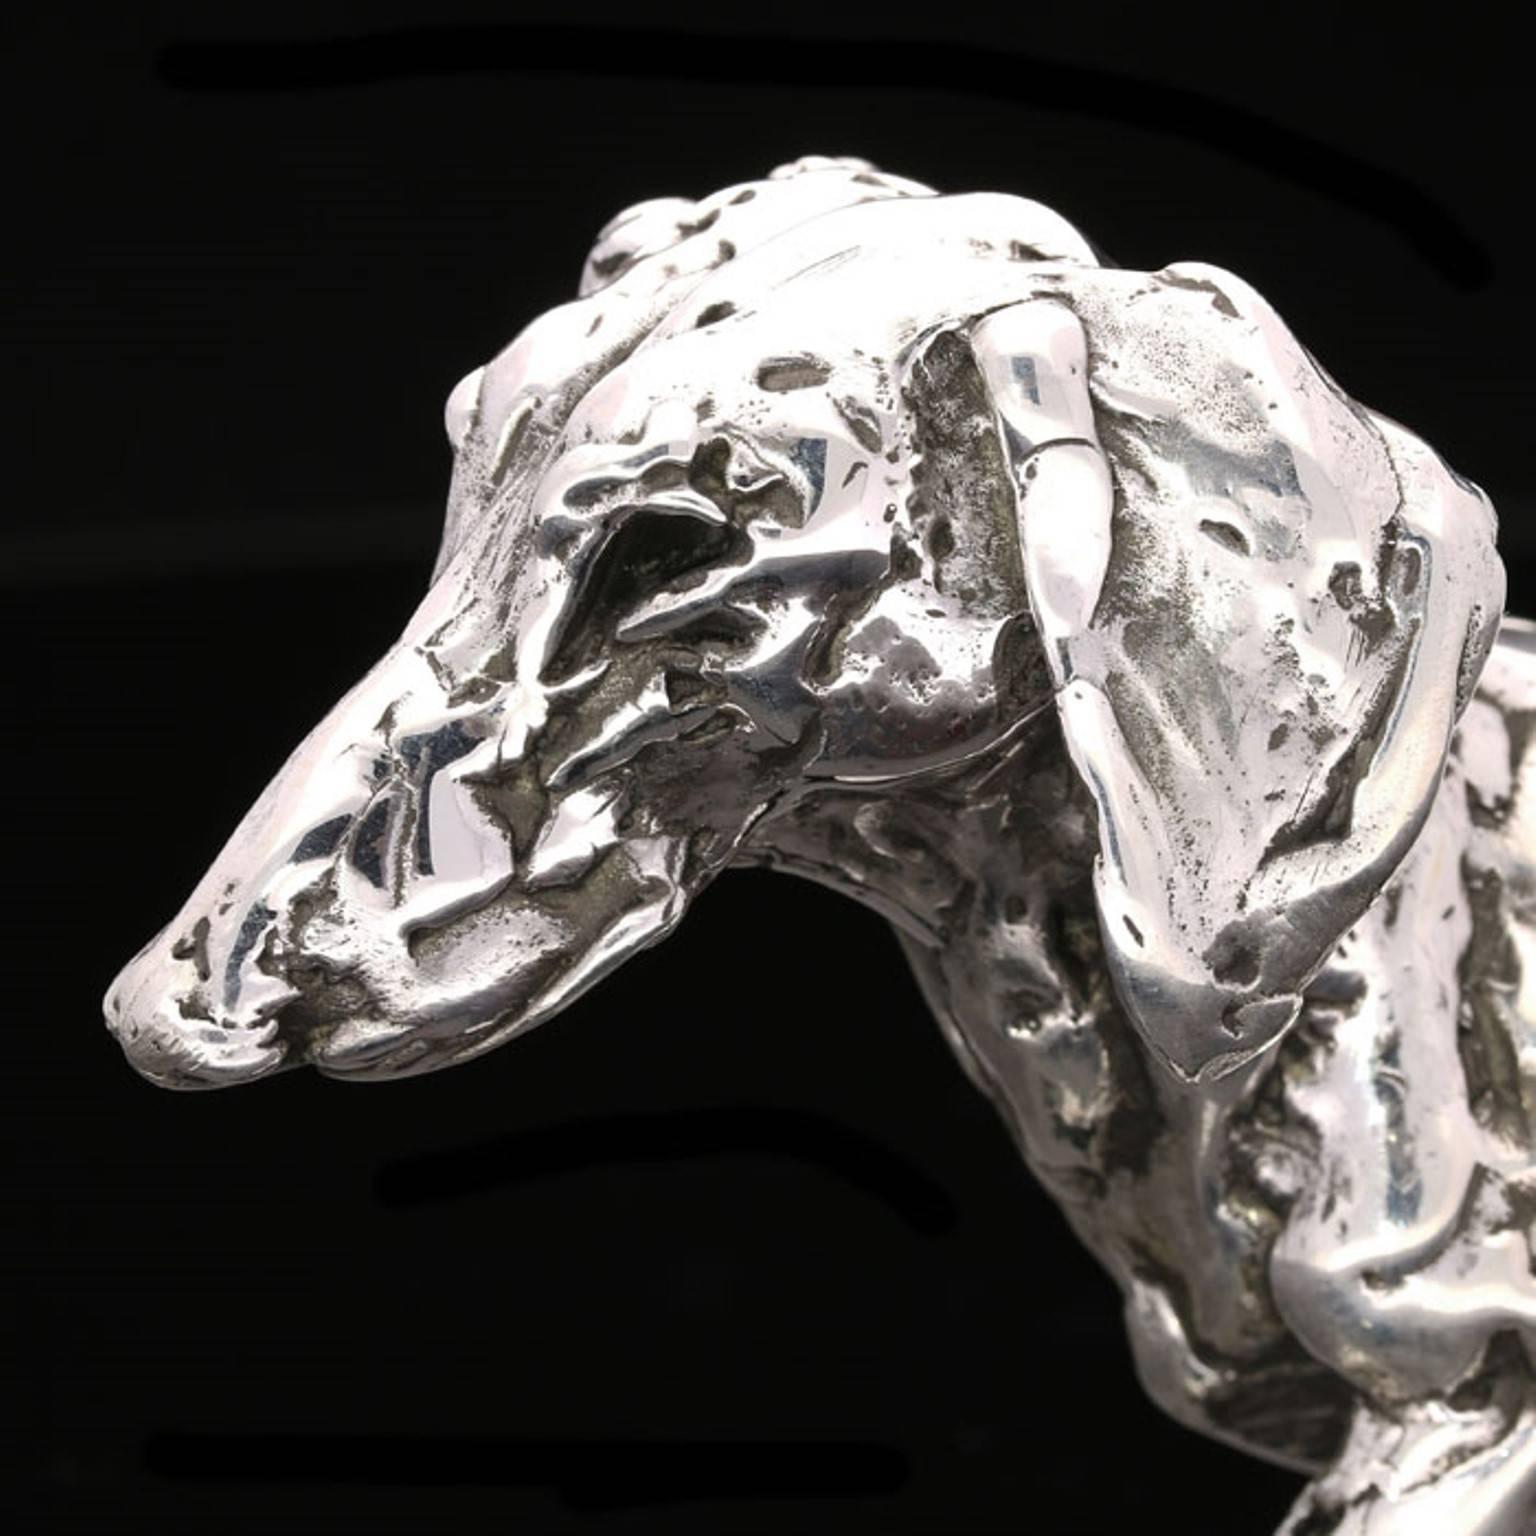 Lucy Kinsella ‘Dachshund’ sterling silver sculpture 1